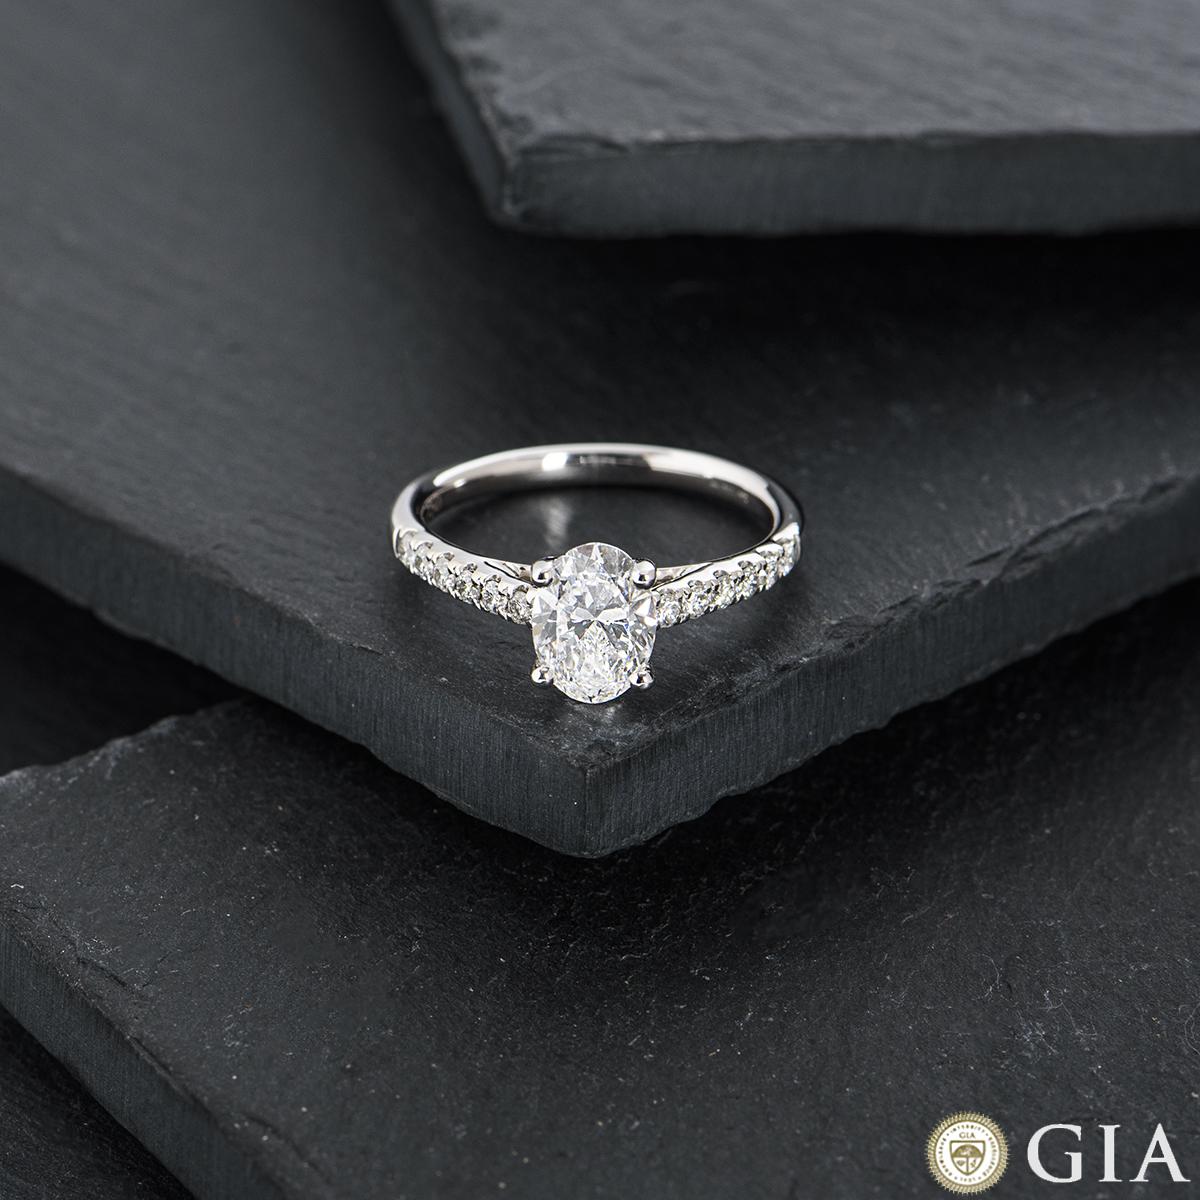 GIA Certified White Gold Oval Cut Diamond Ring 1.00ct D/SI1 In Excellent Condition For Sale In London, GB